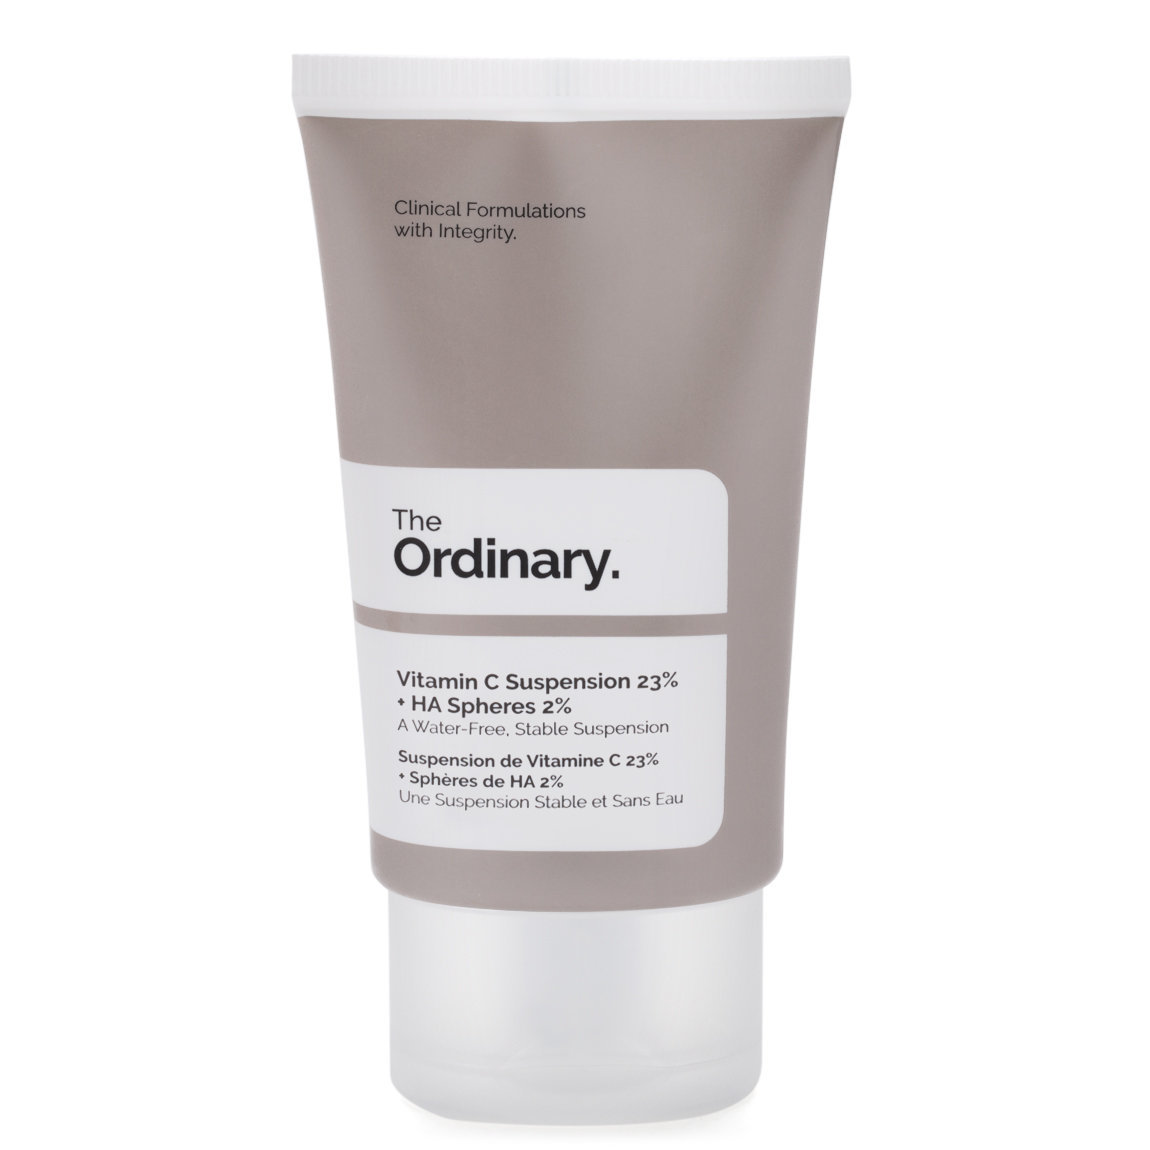 The Ordinary. Vitamin C Suspension 23% + HA Spheres 2% alternative view 1 - product swatch.